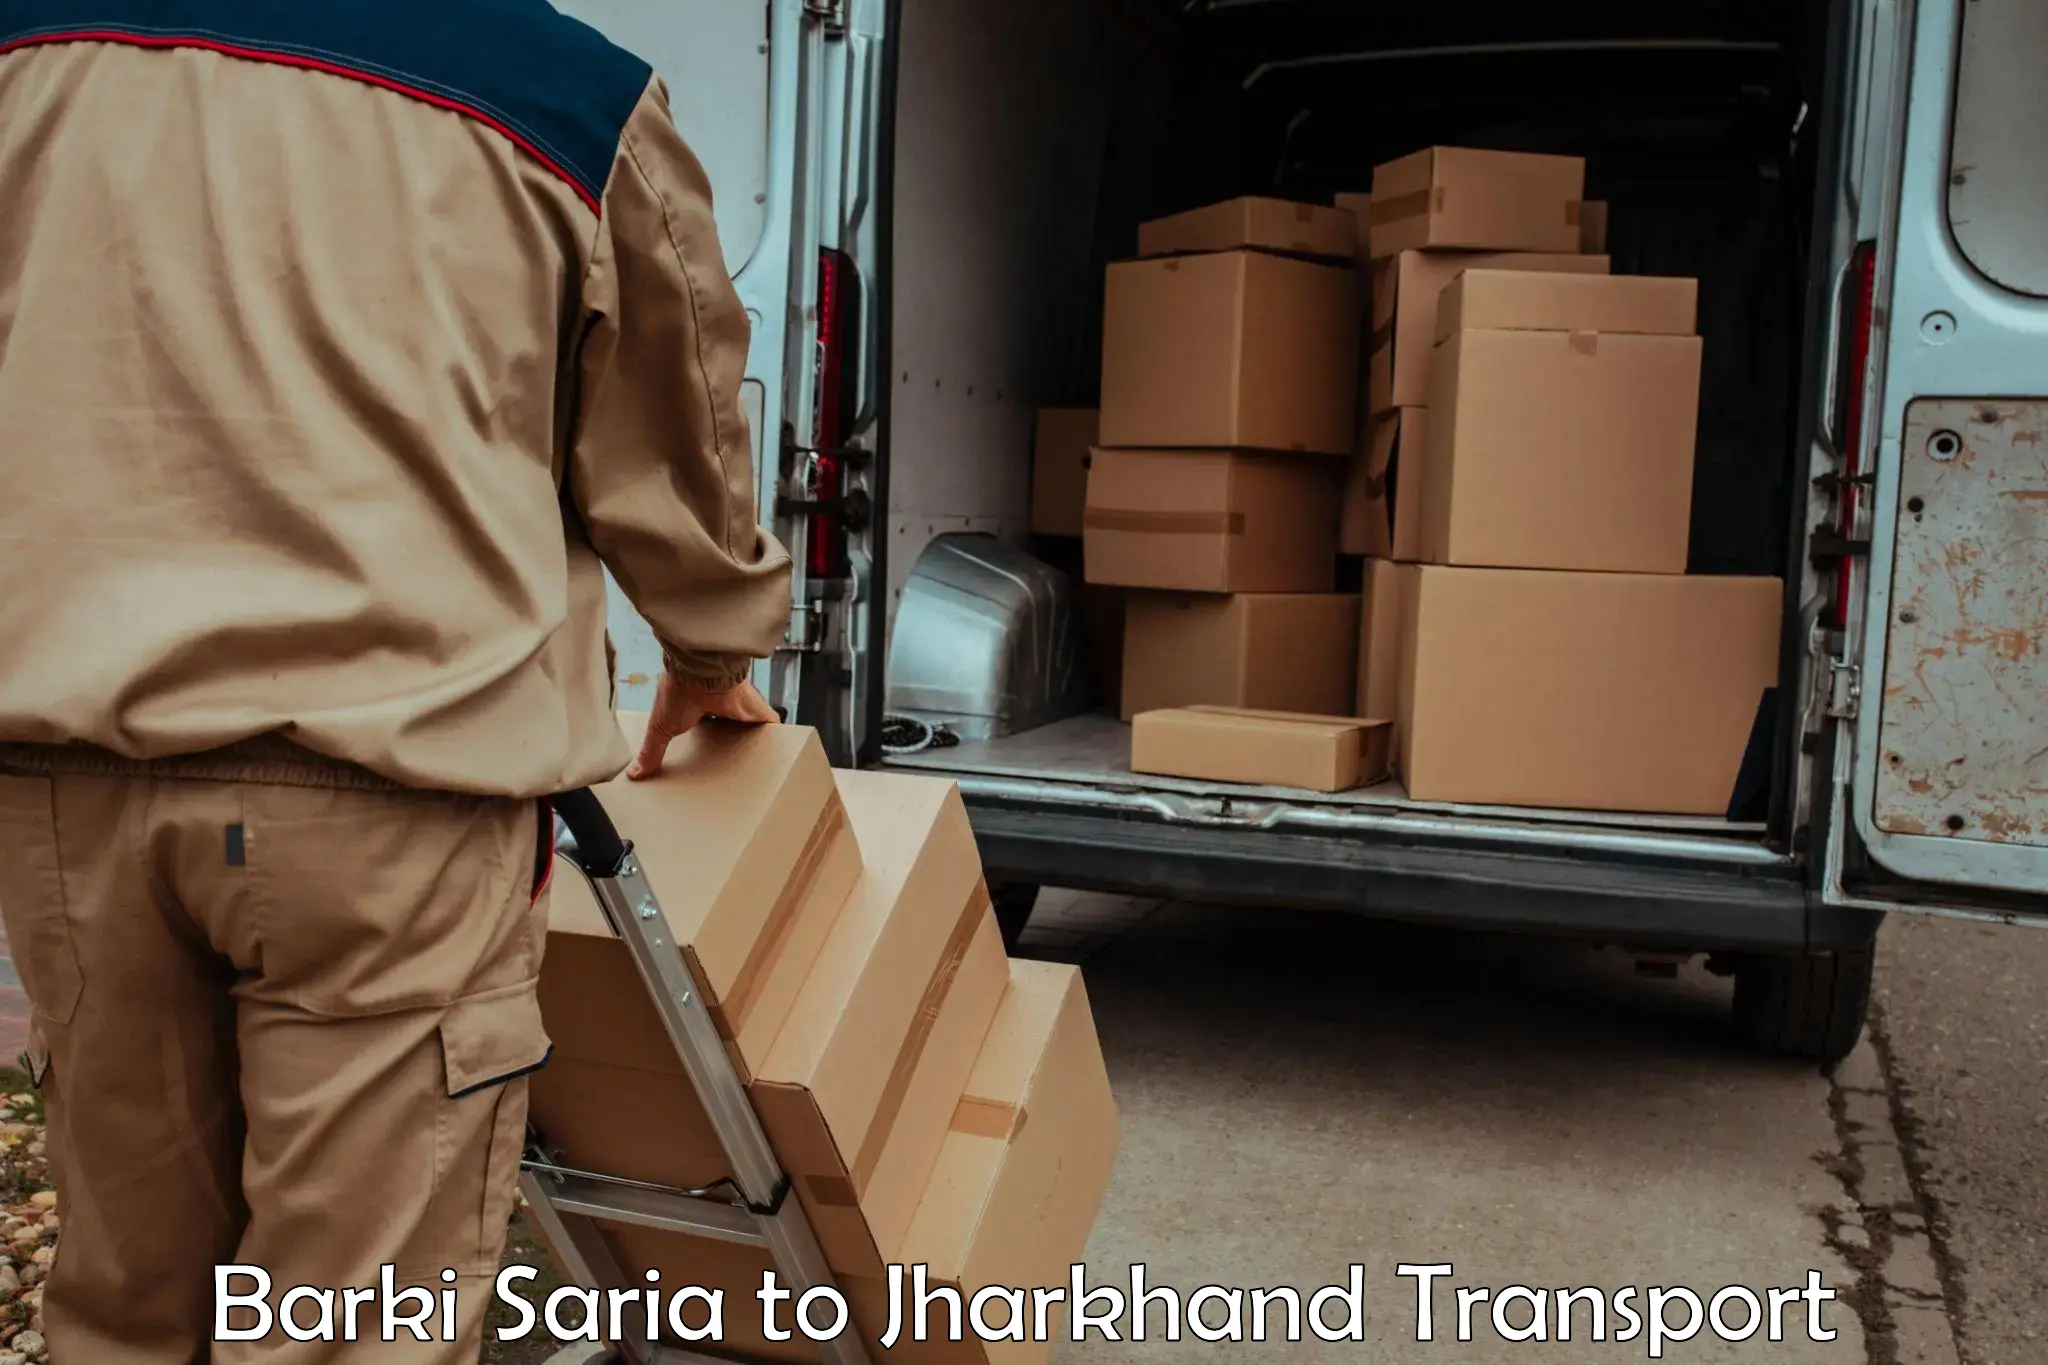 Parcel transport services in Barki Saria to Chandil